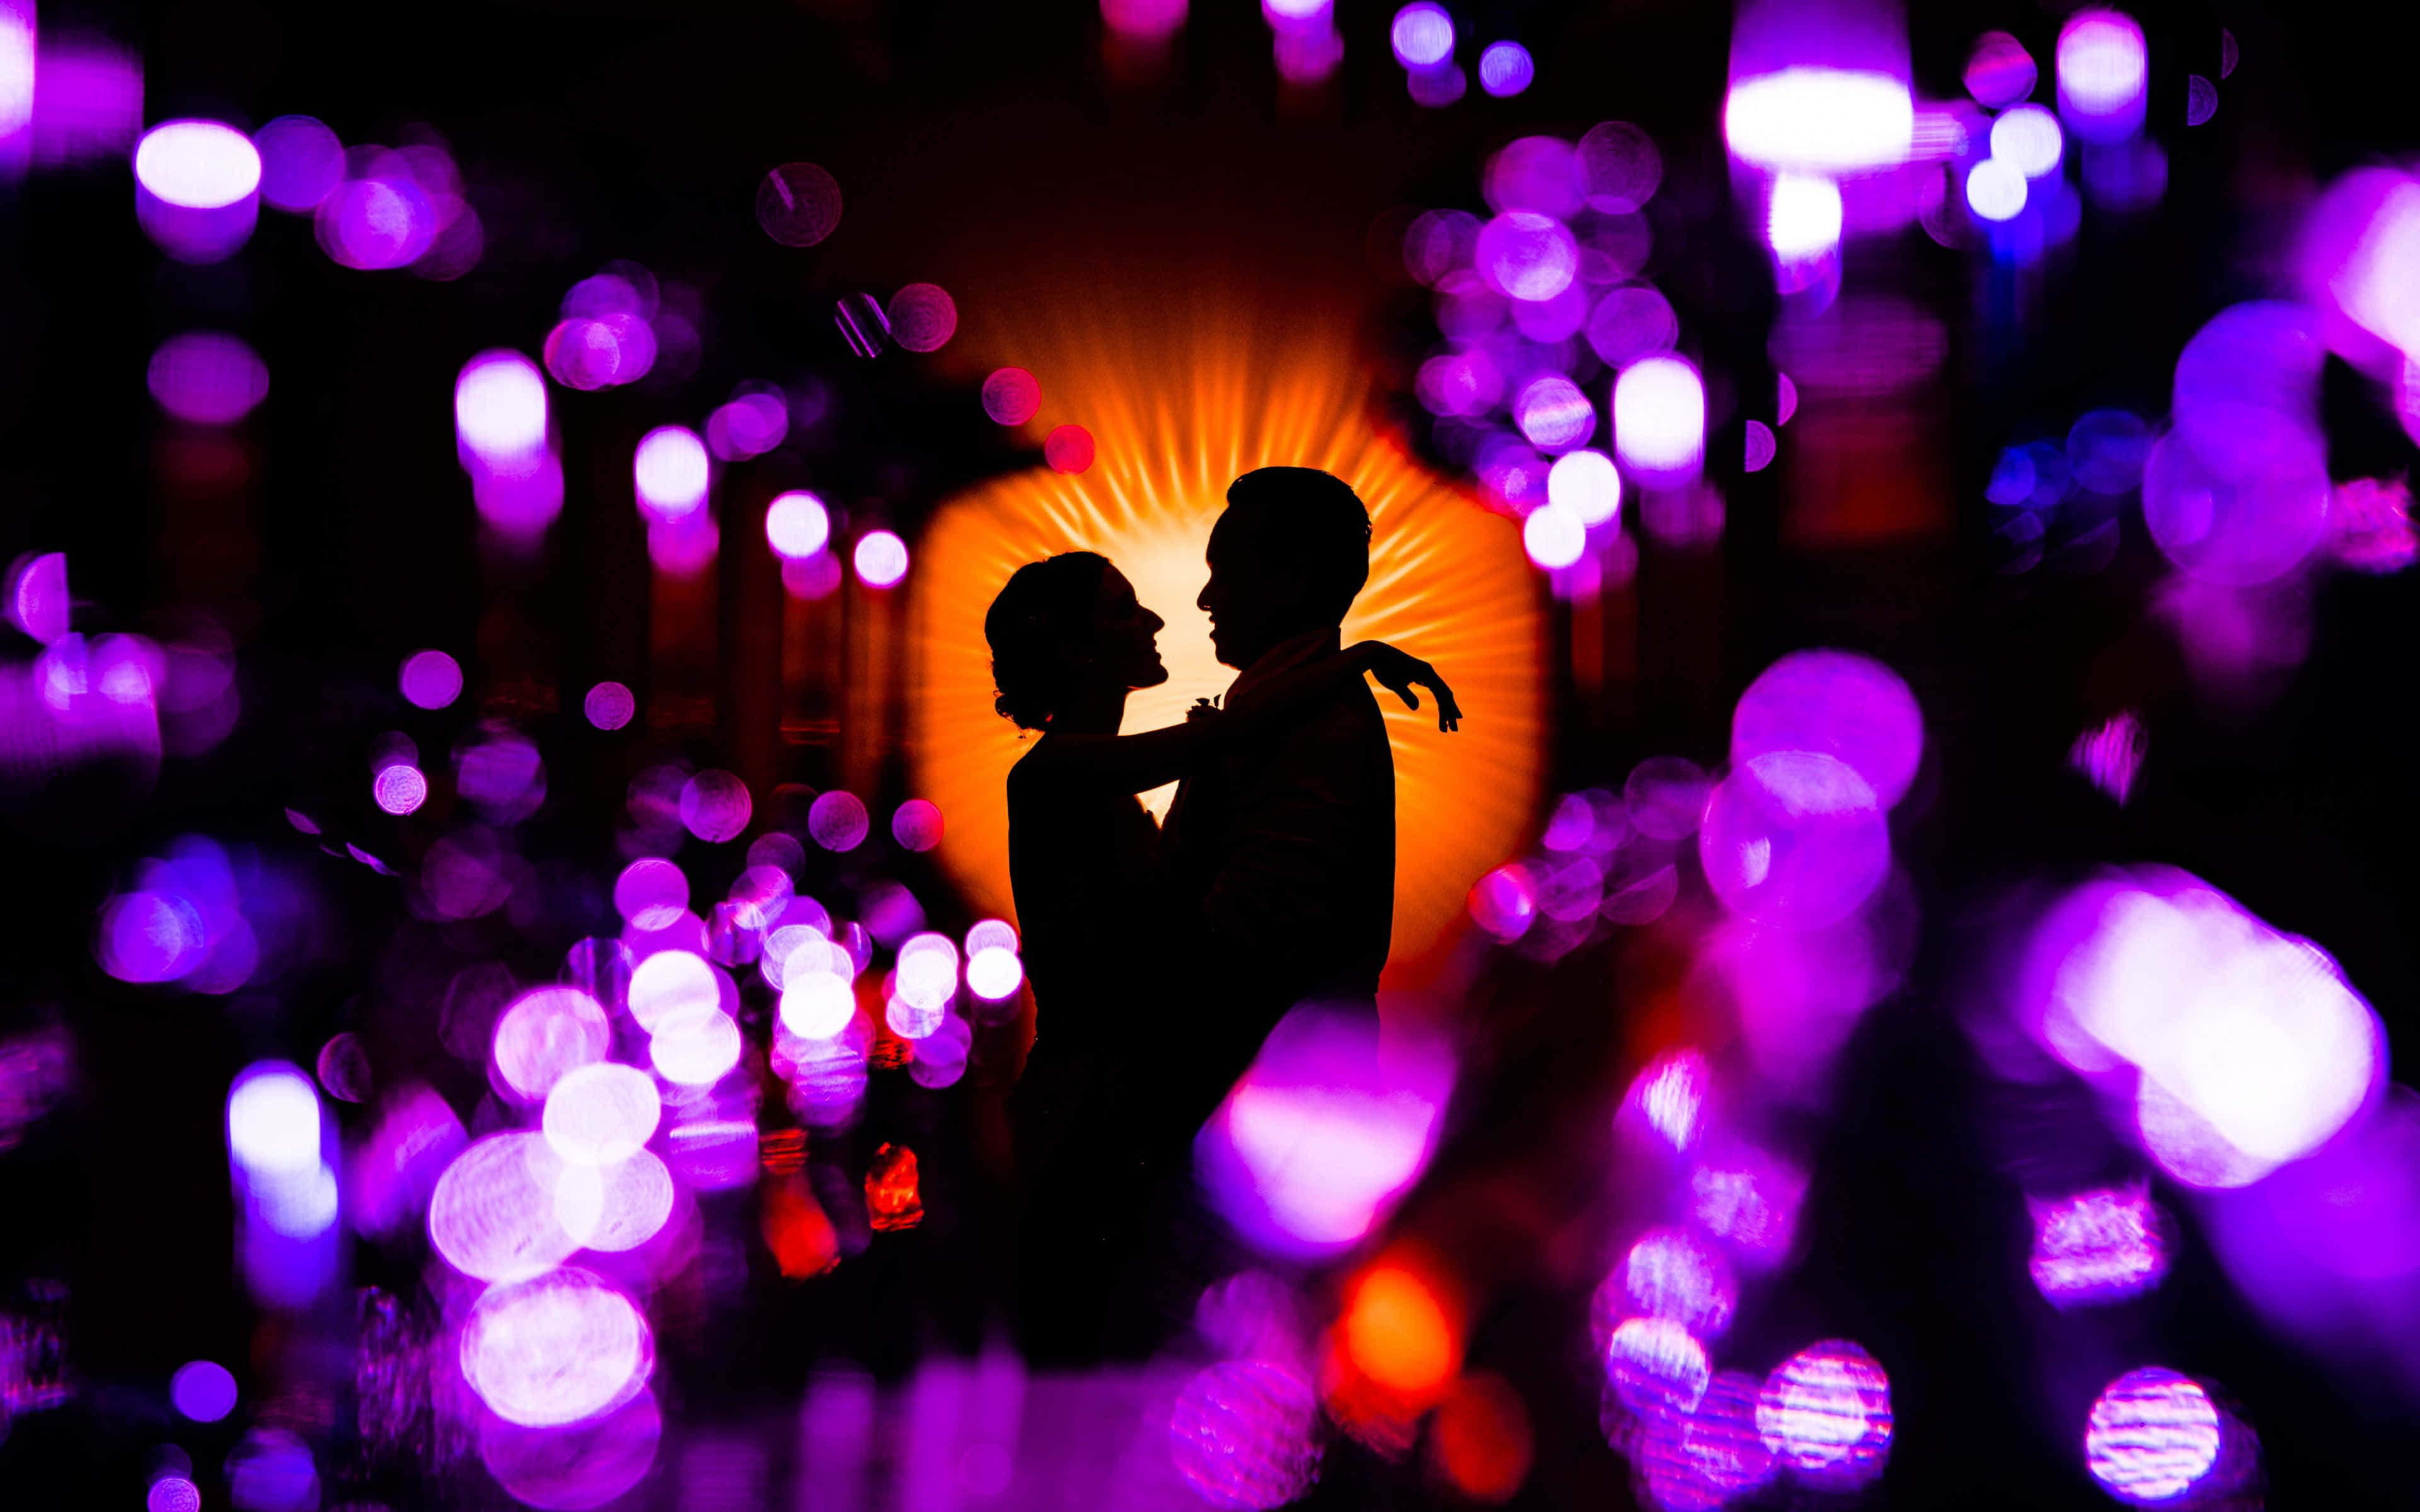 Silhouette Love Amidst Shimmering Lights